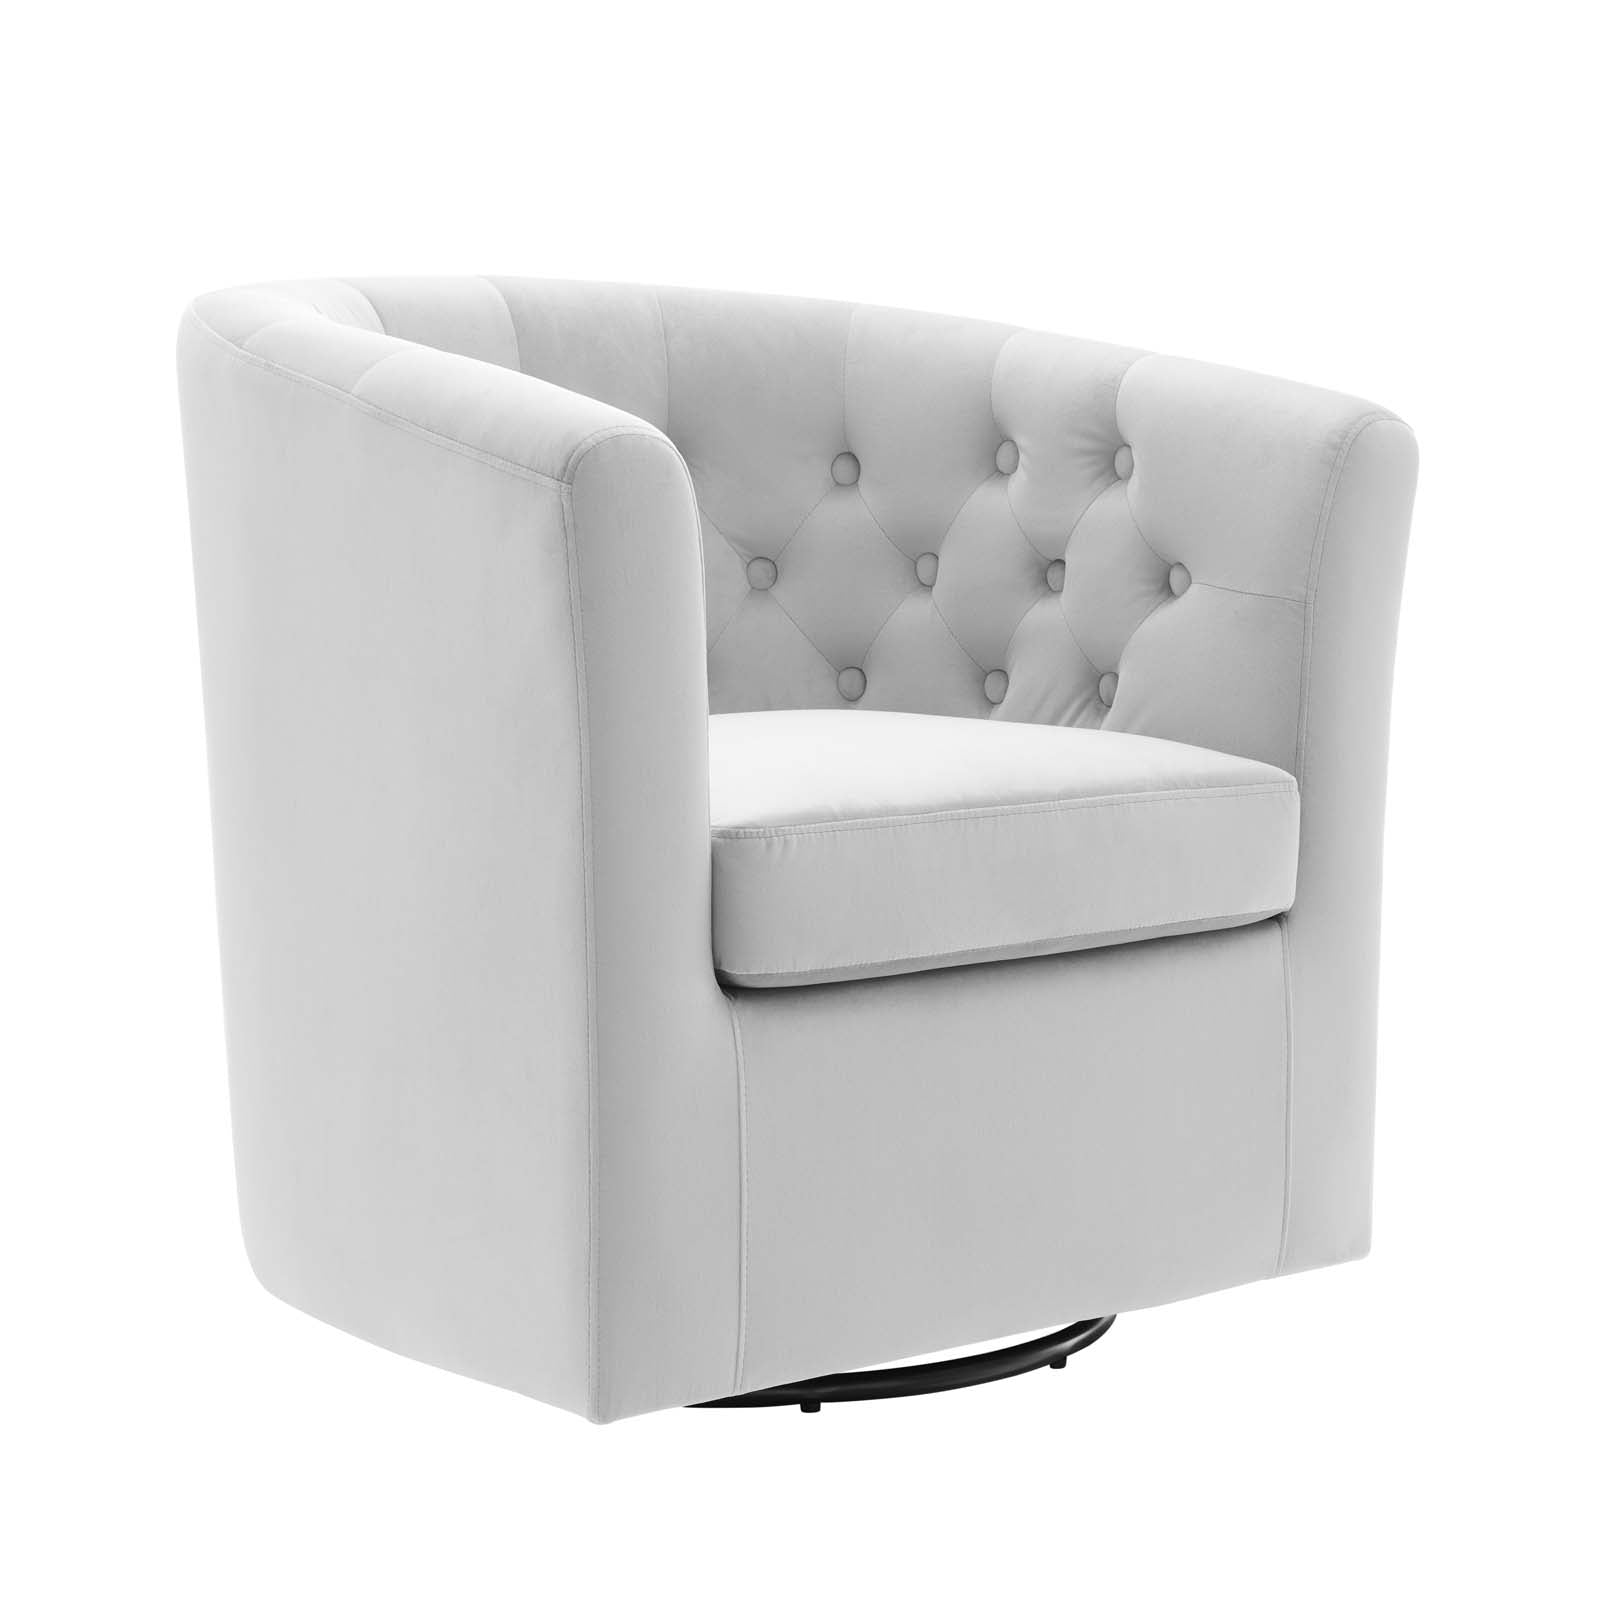 Modway Accent Chairs - Prospect Tufted Performance Velvet Swivel Armchair Light Gray